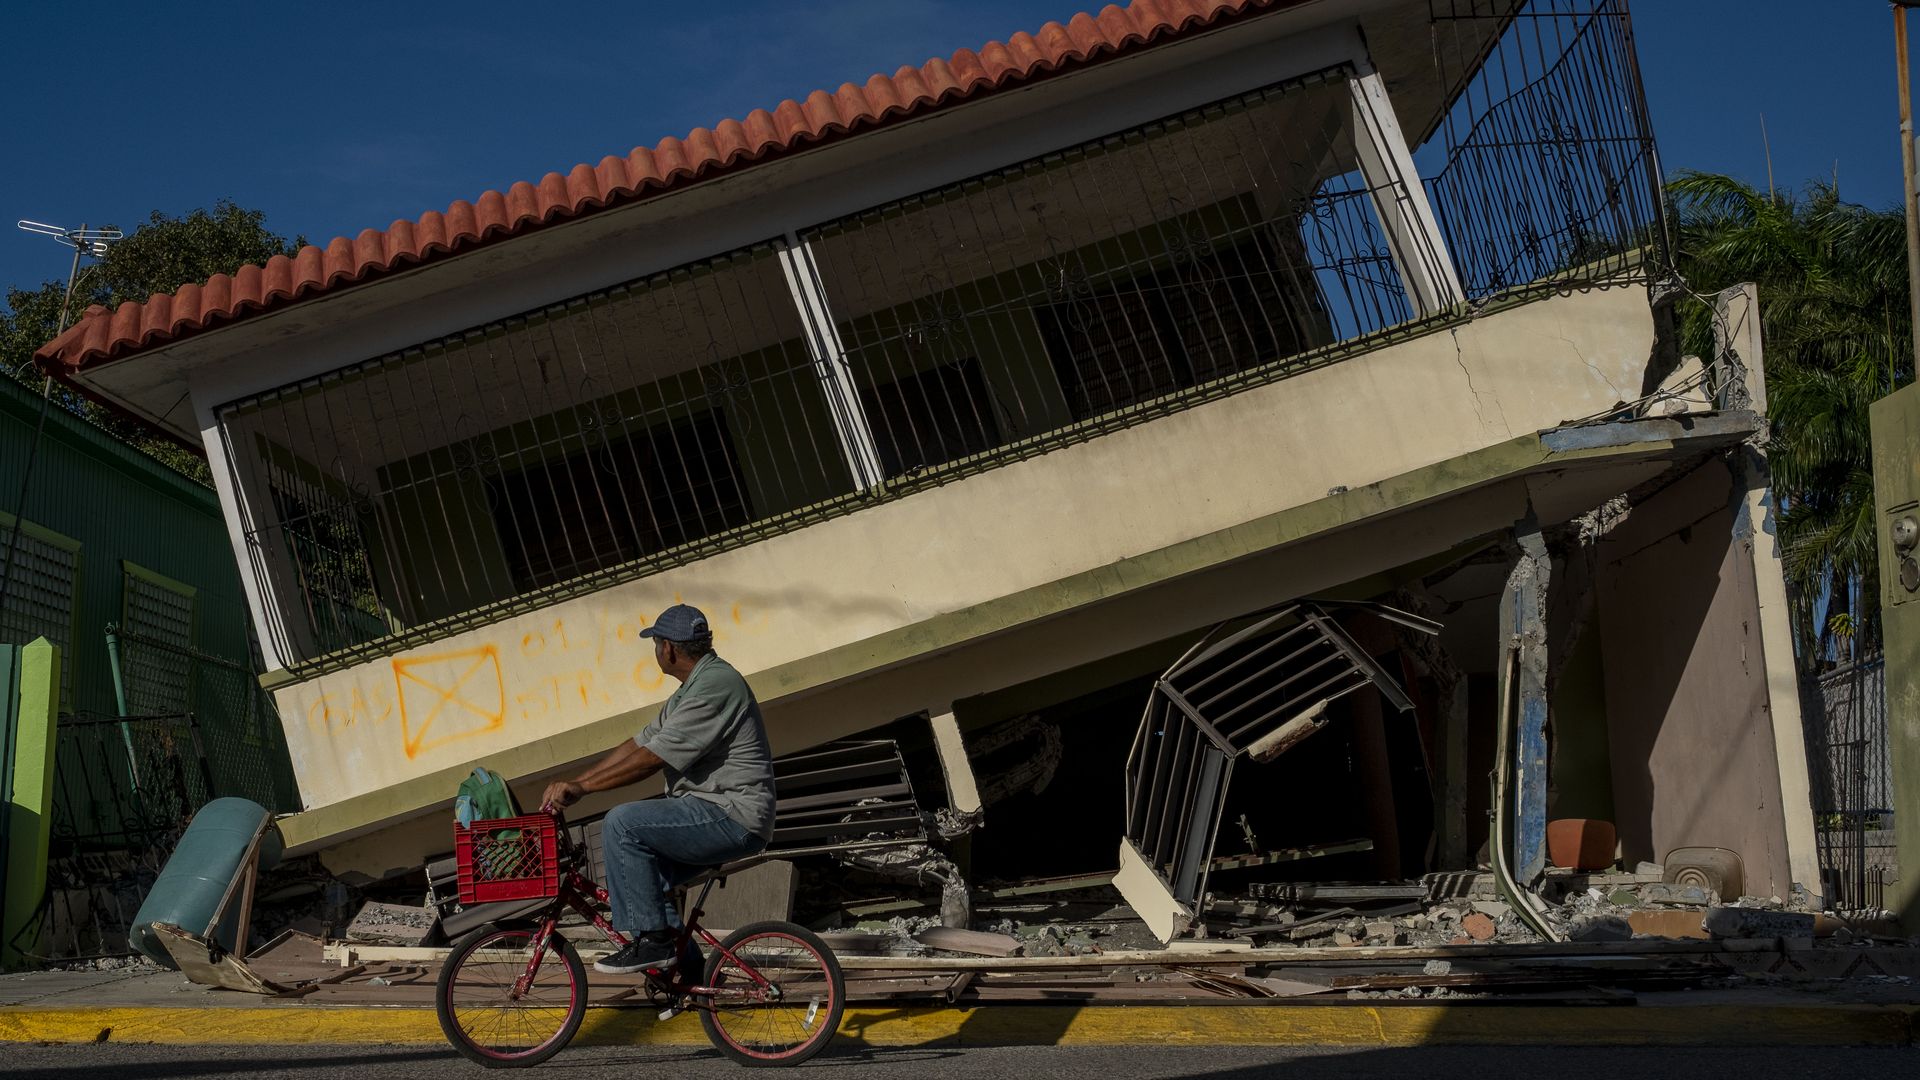 In this image, a Puerto Rican man bikes past a lopsided building. 